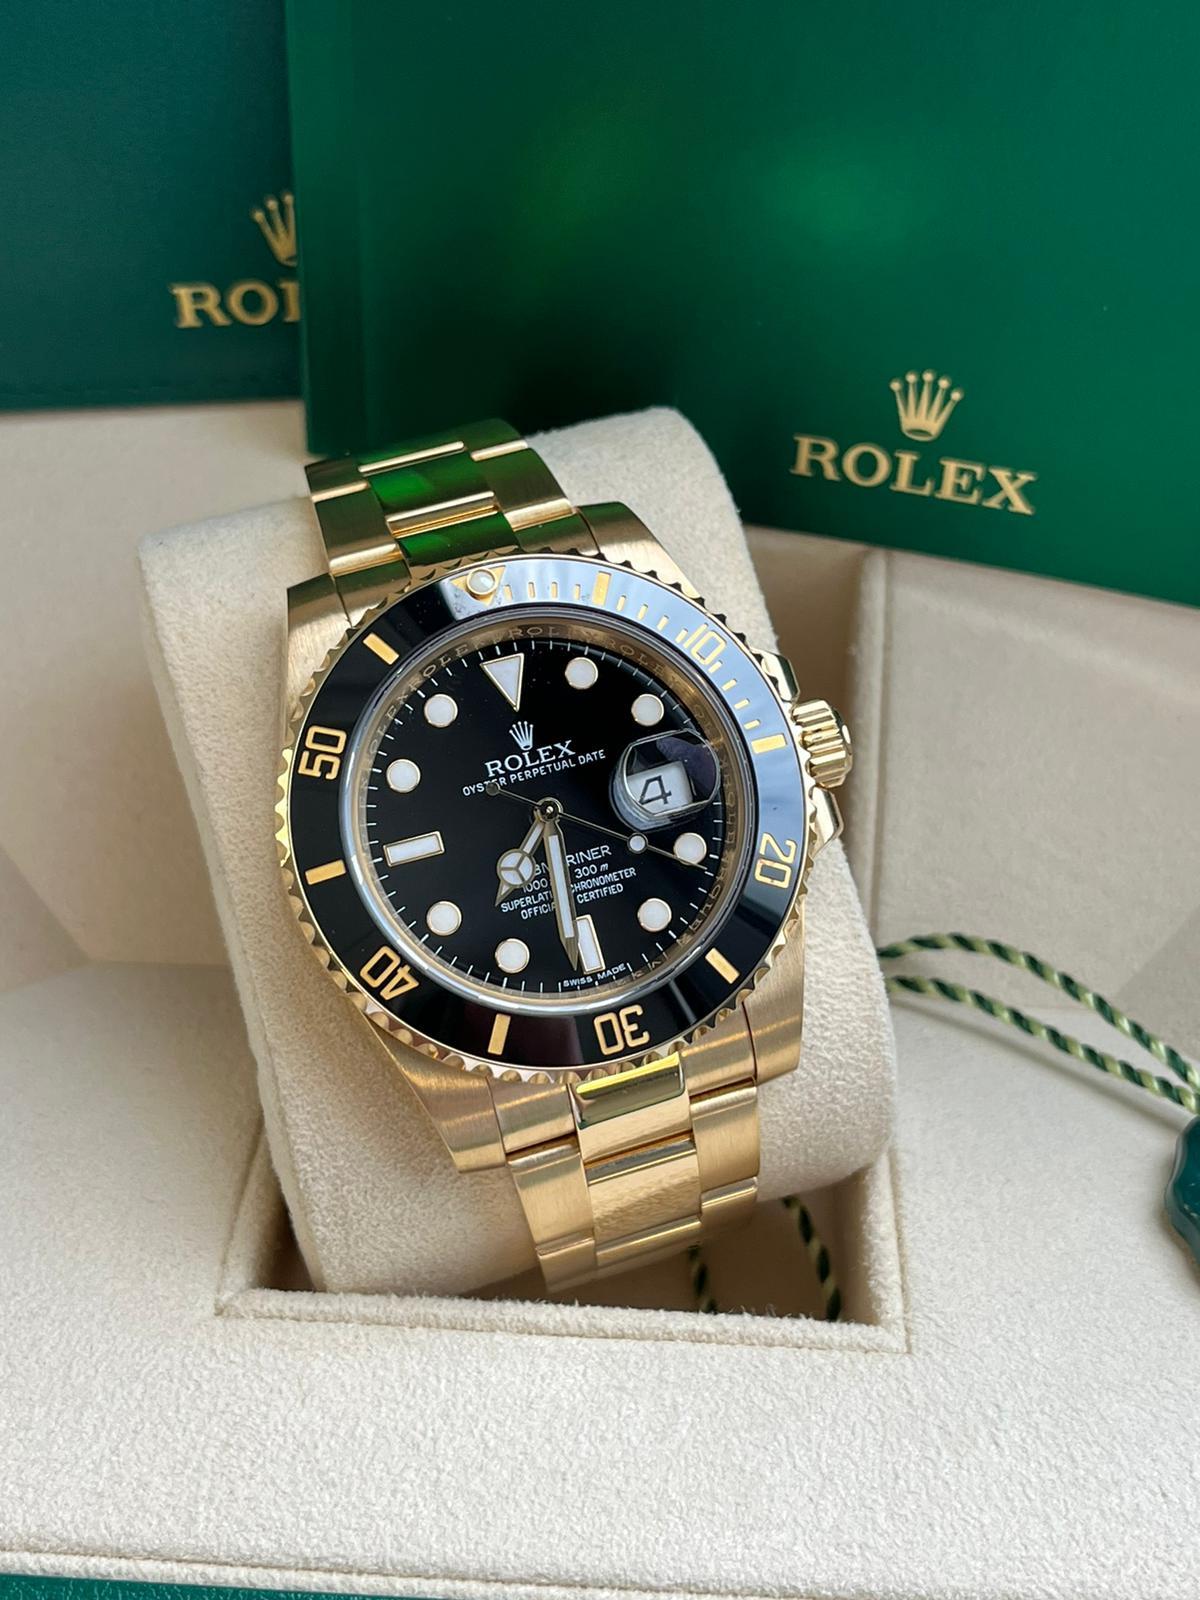 Rolex Submariner Date Automatic Yellow Gold Black Dial Men's Watch 116618LN For Sale 3